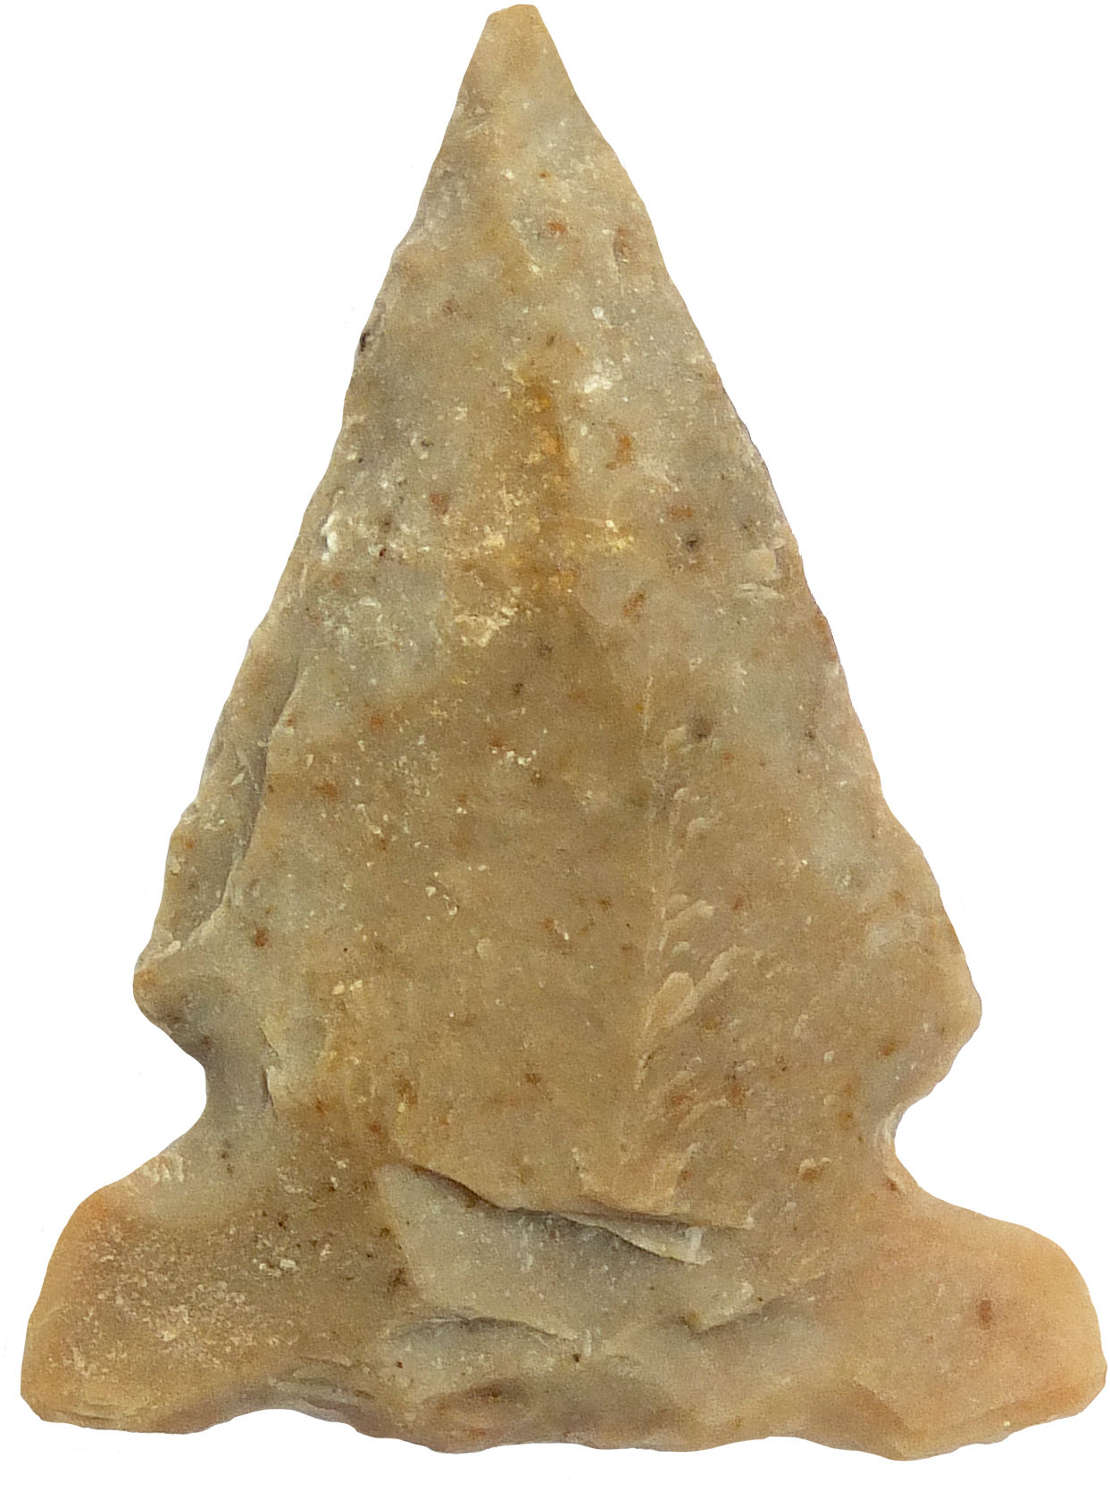 A small North American Indian triangular side-notched flint point